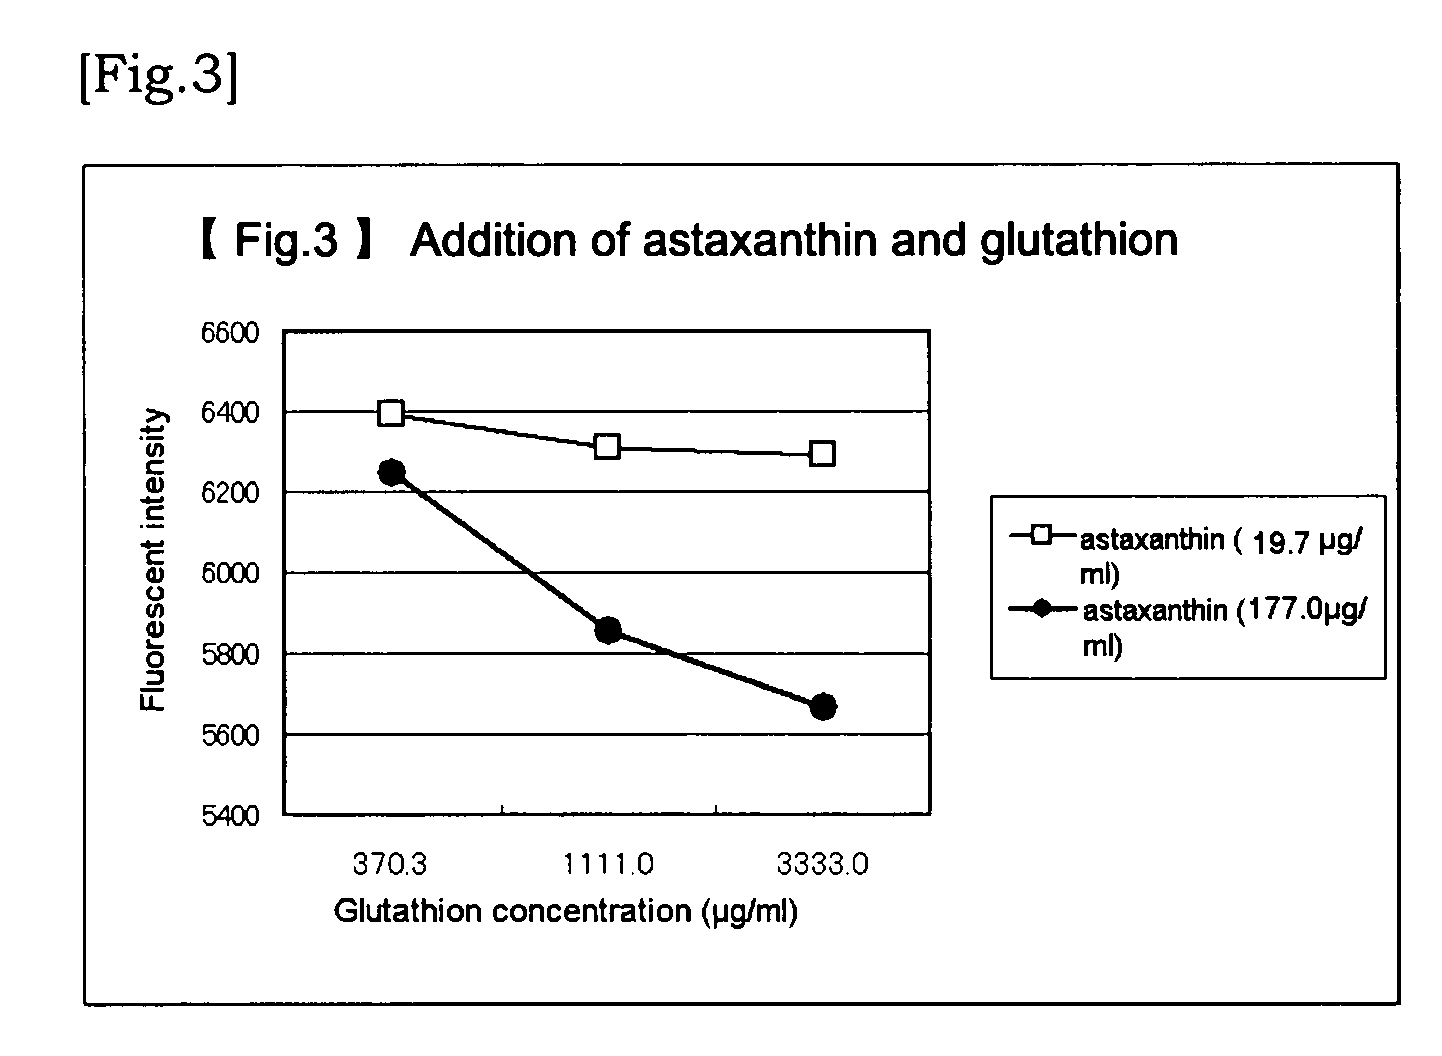 Agent for Alleviating Vascular Failure